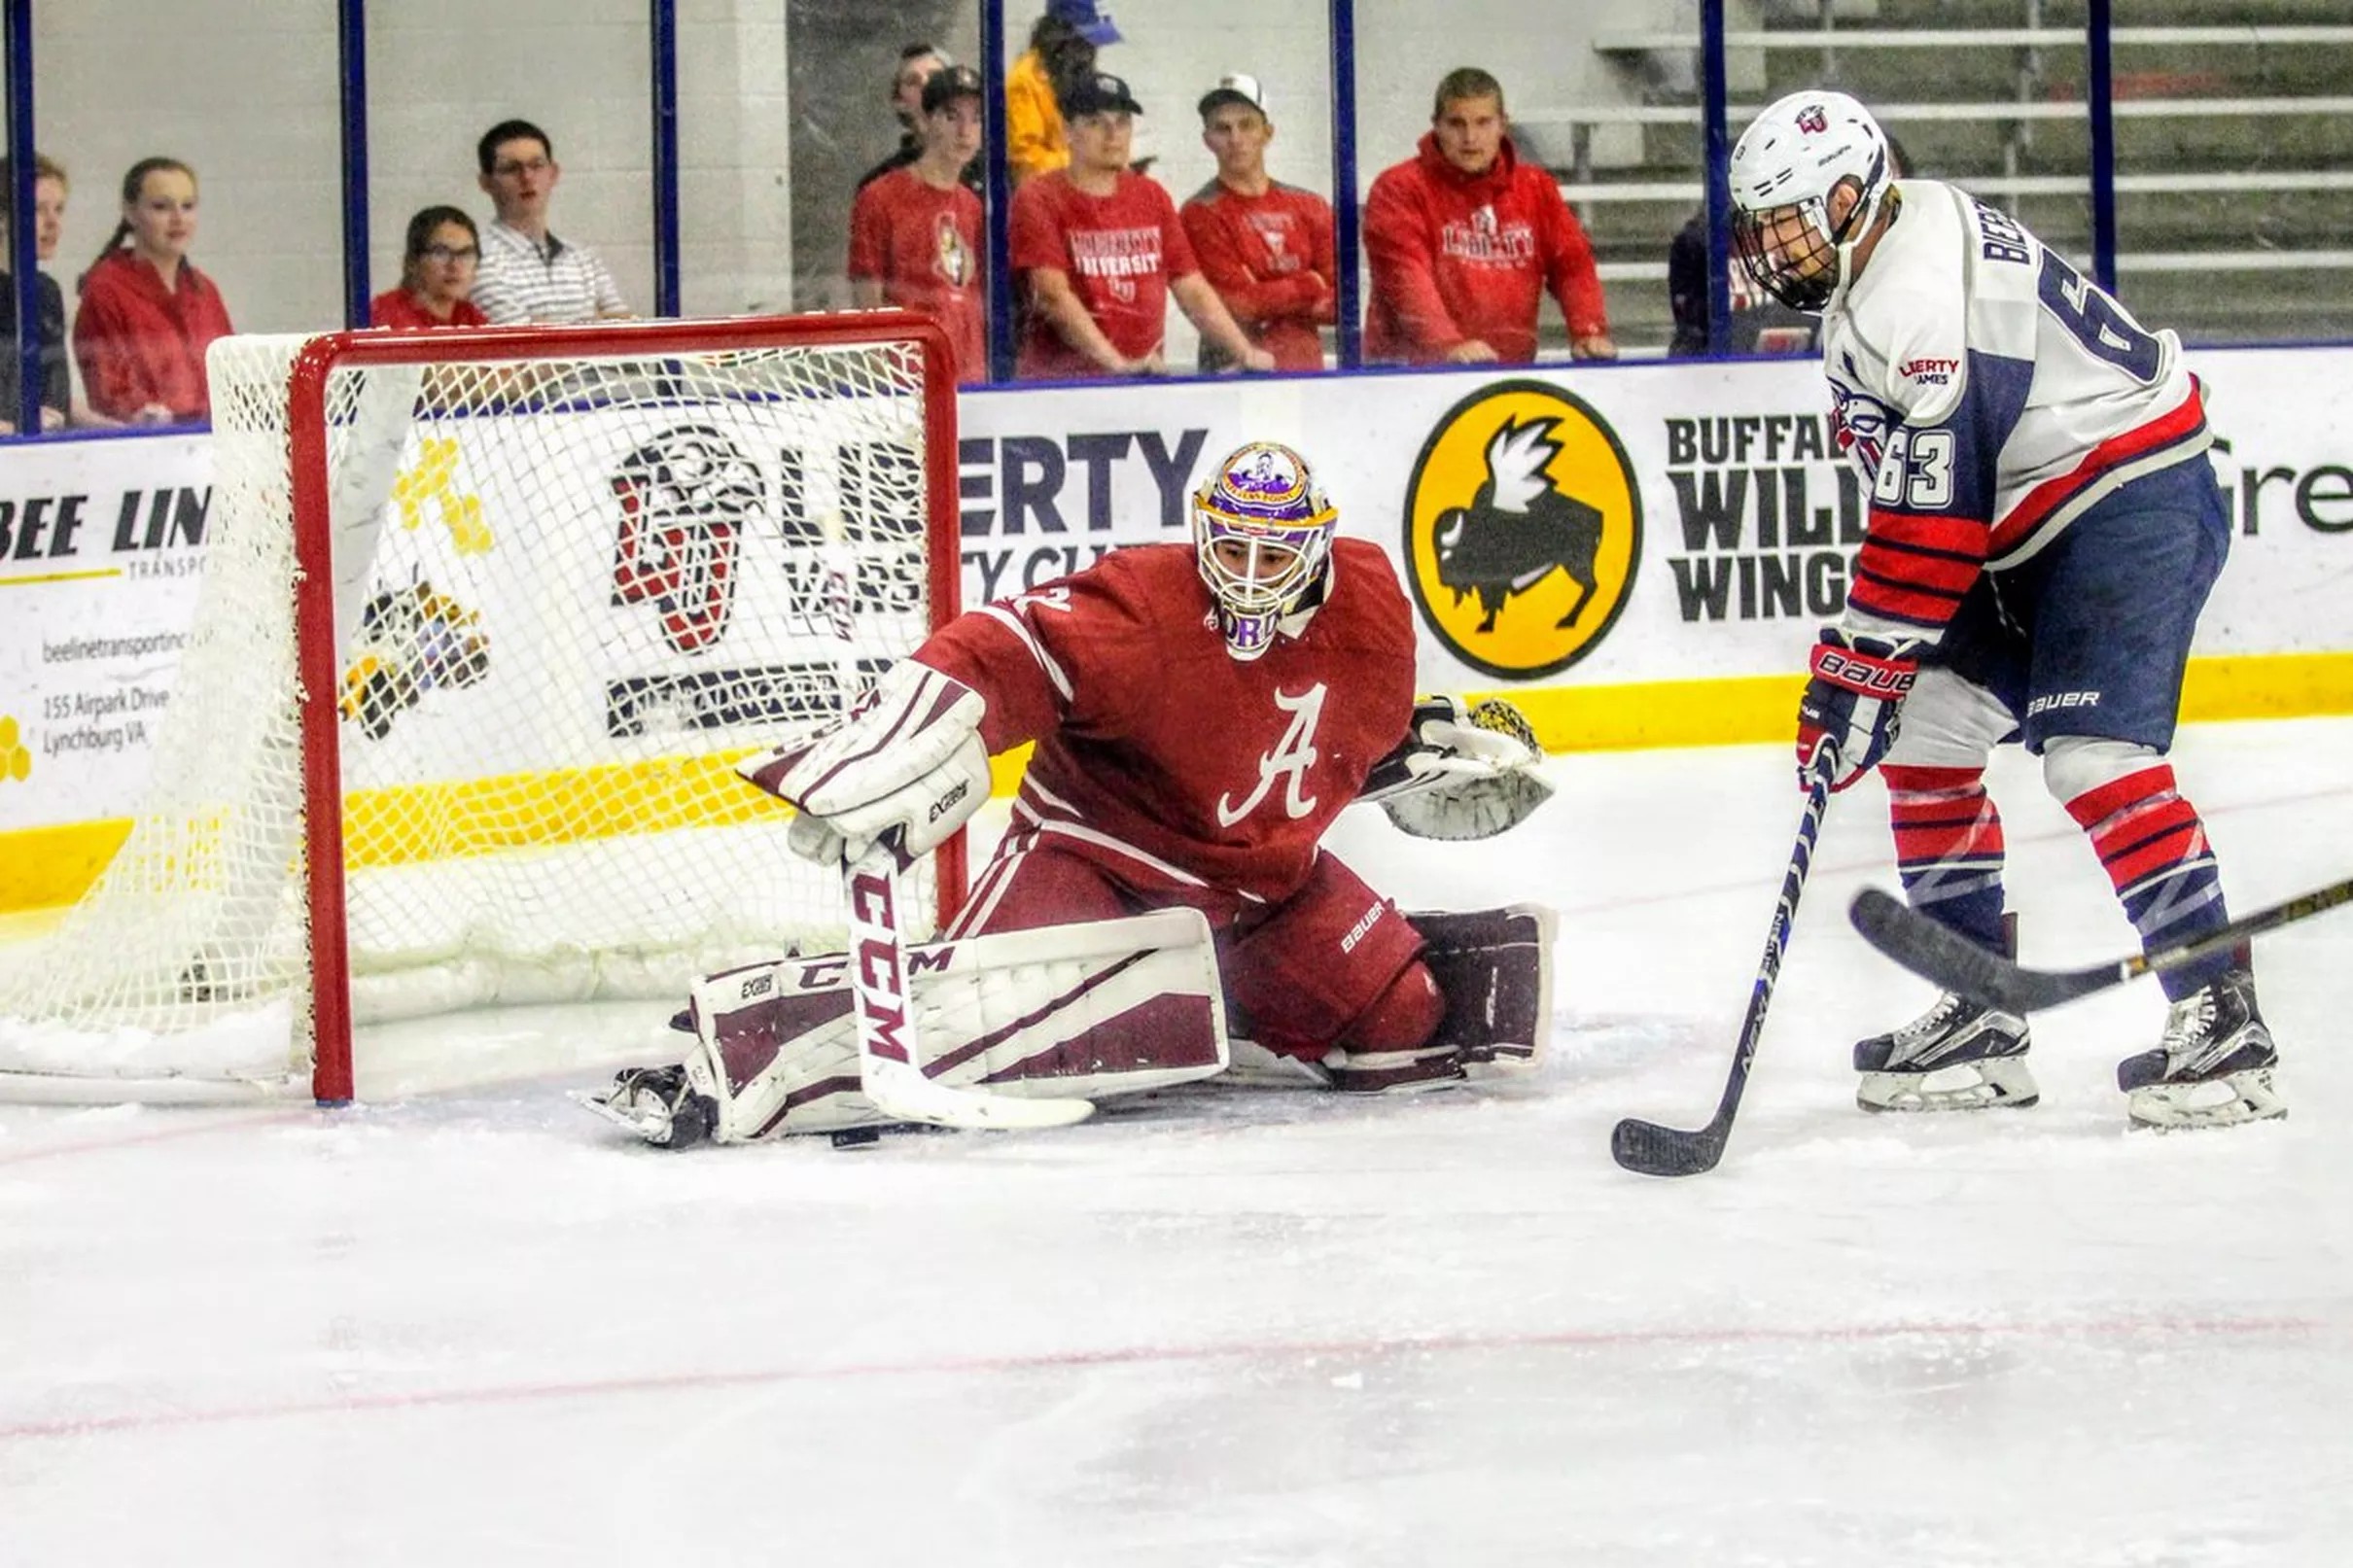 Alabama Hockey to benefit cancer research in the October Saves Goalie